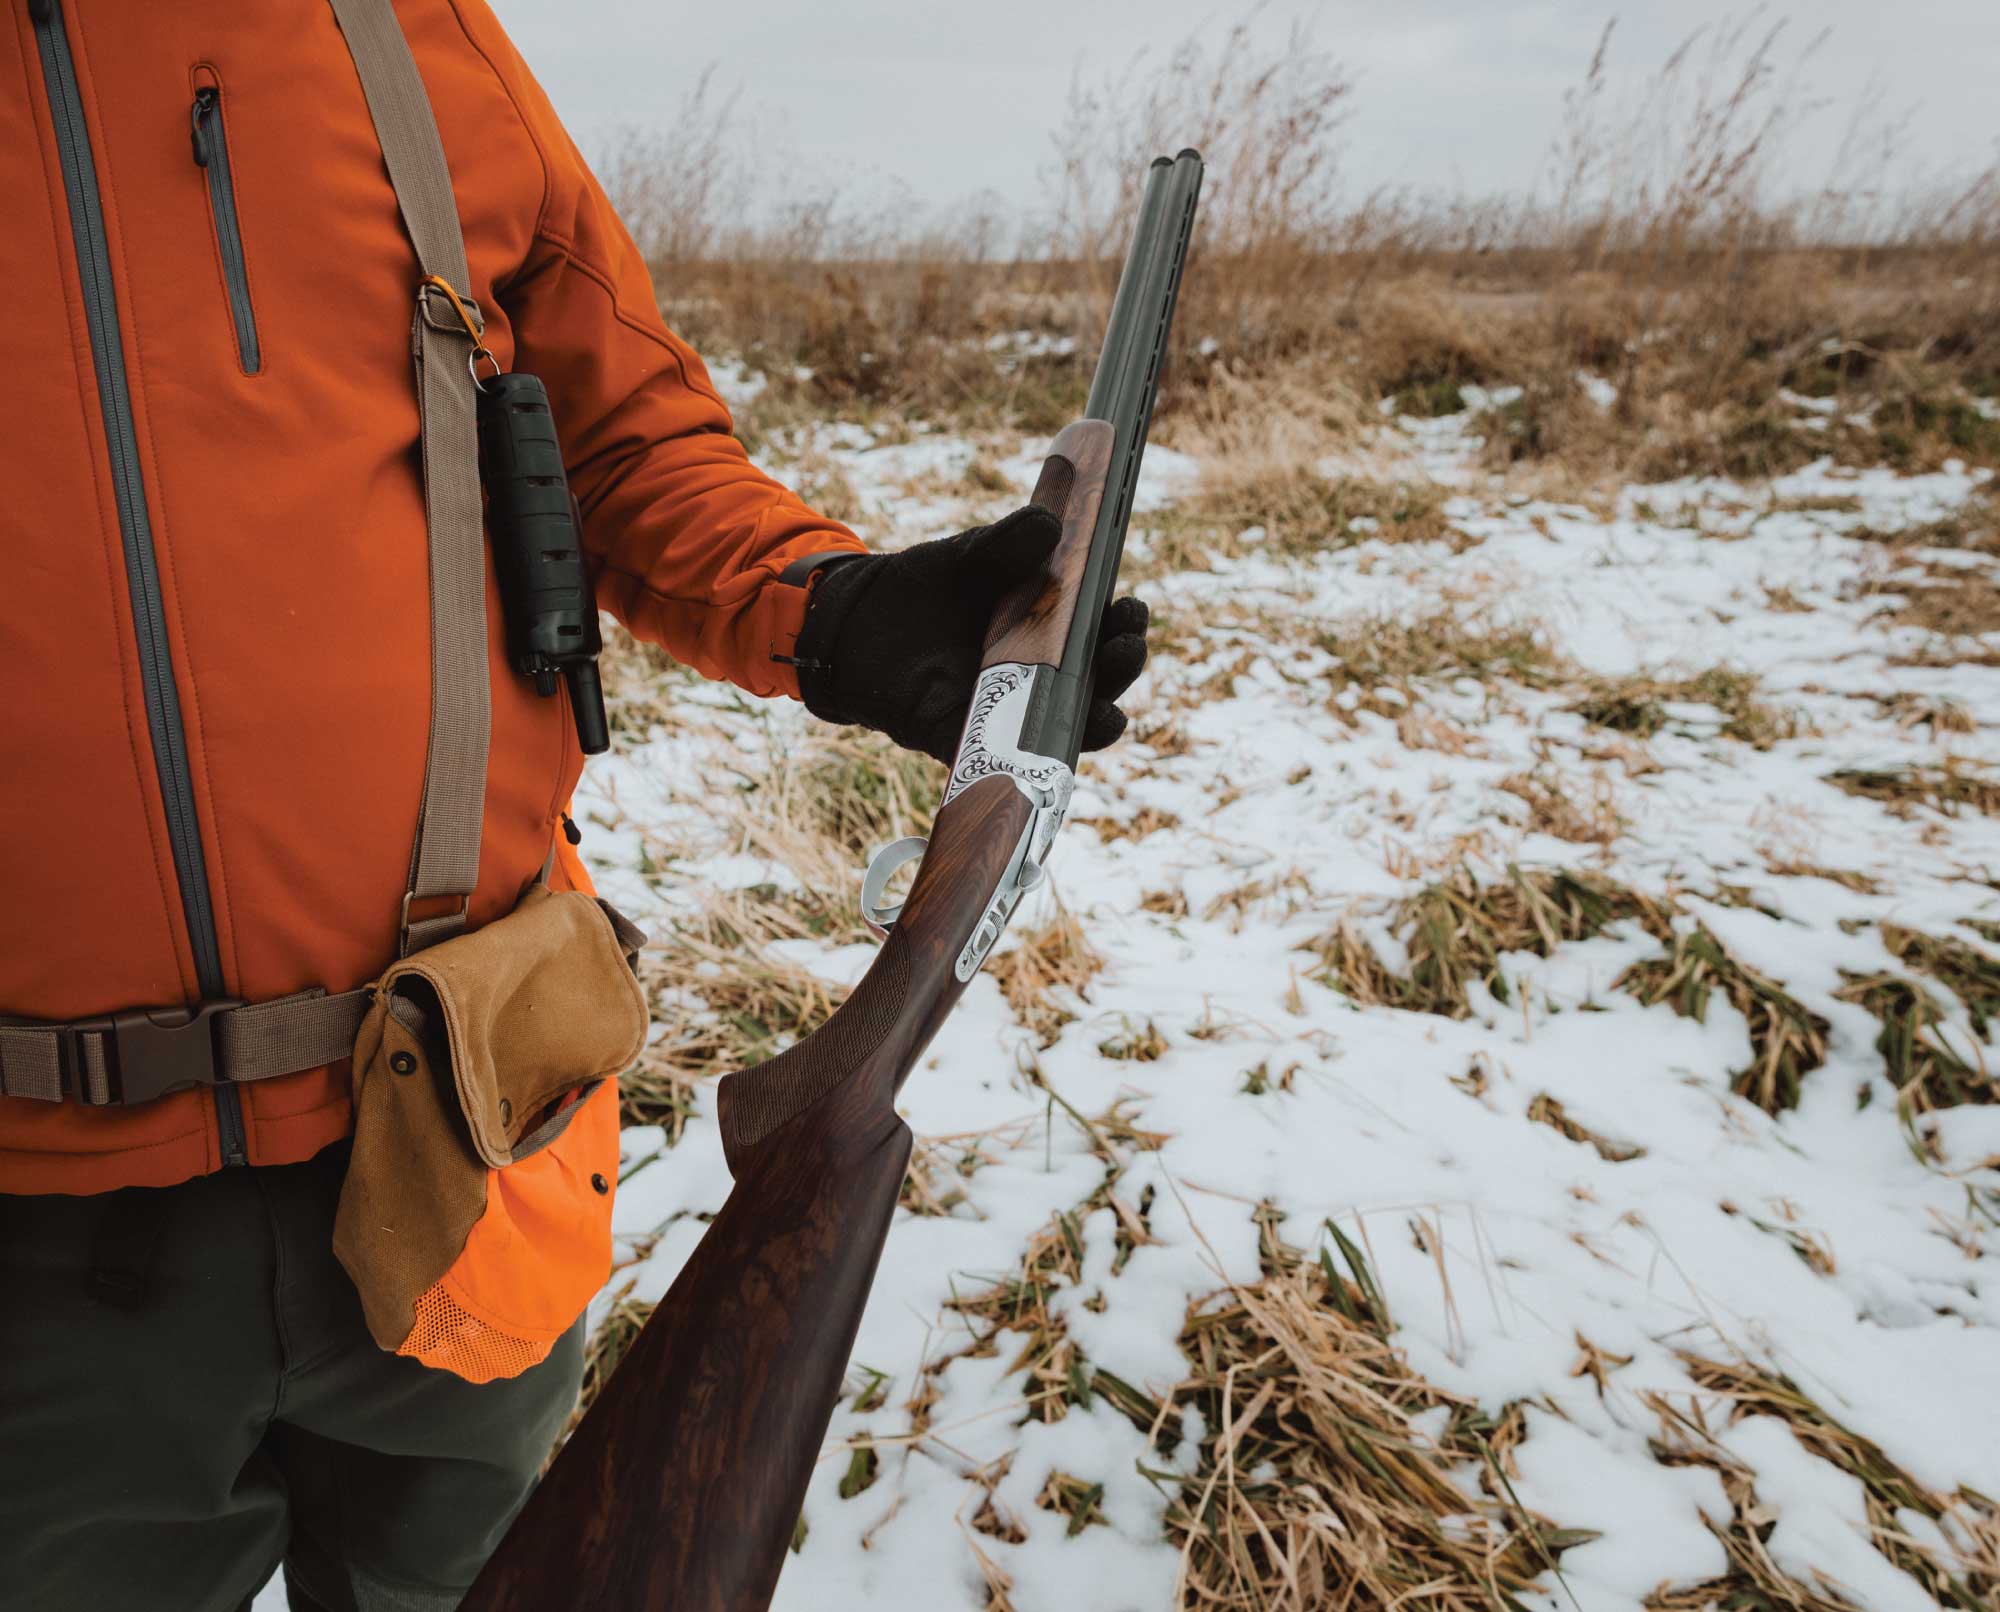 https://projectupland.com/wp-content/uploads/2019/01/How-to-Choose-a-Shotgun-for-Pheasant-Hunting-3.jpg